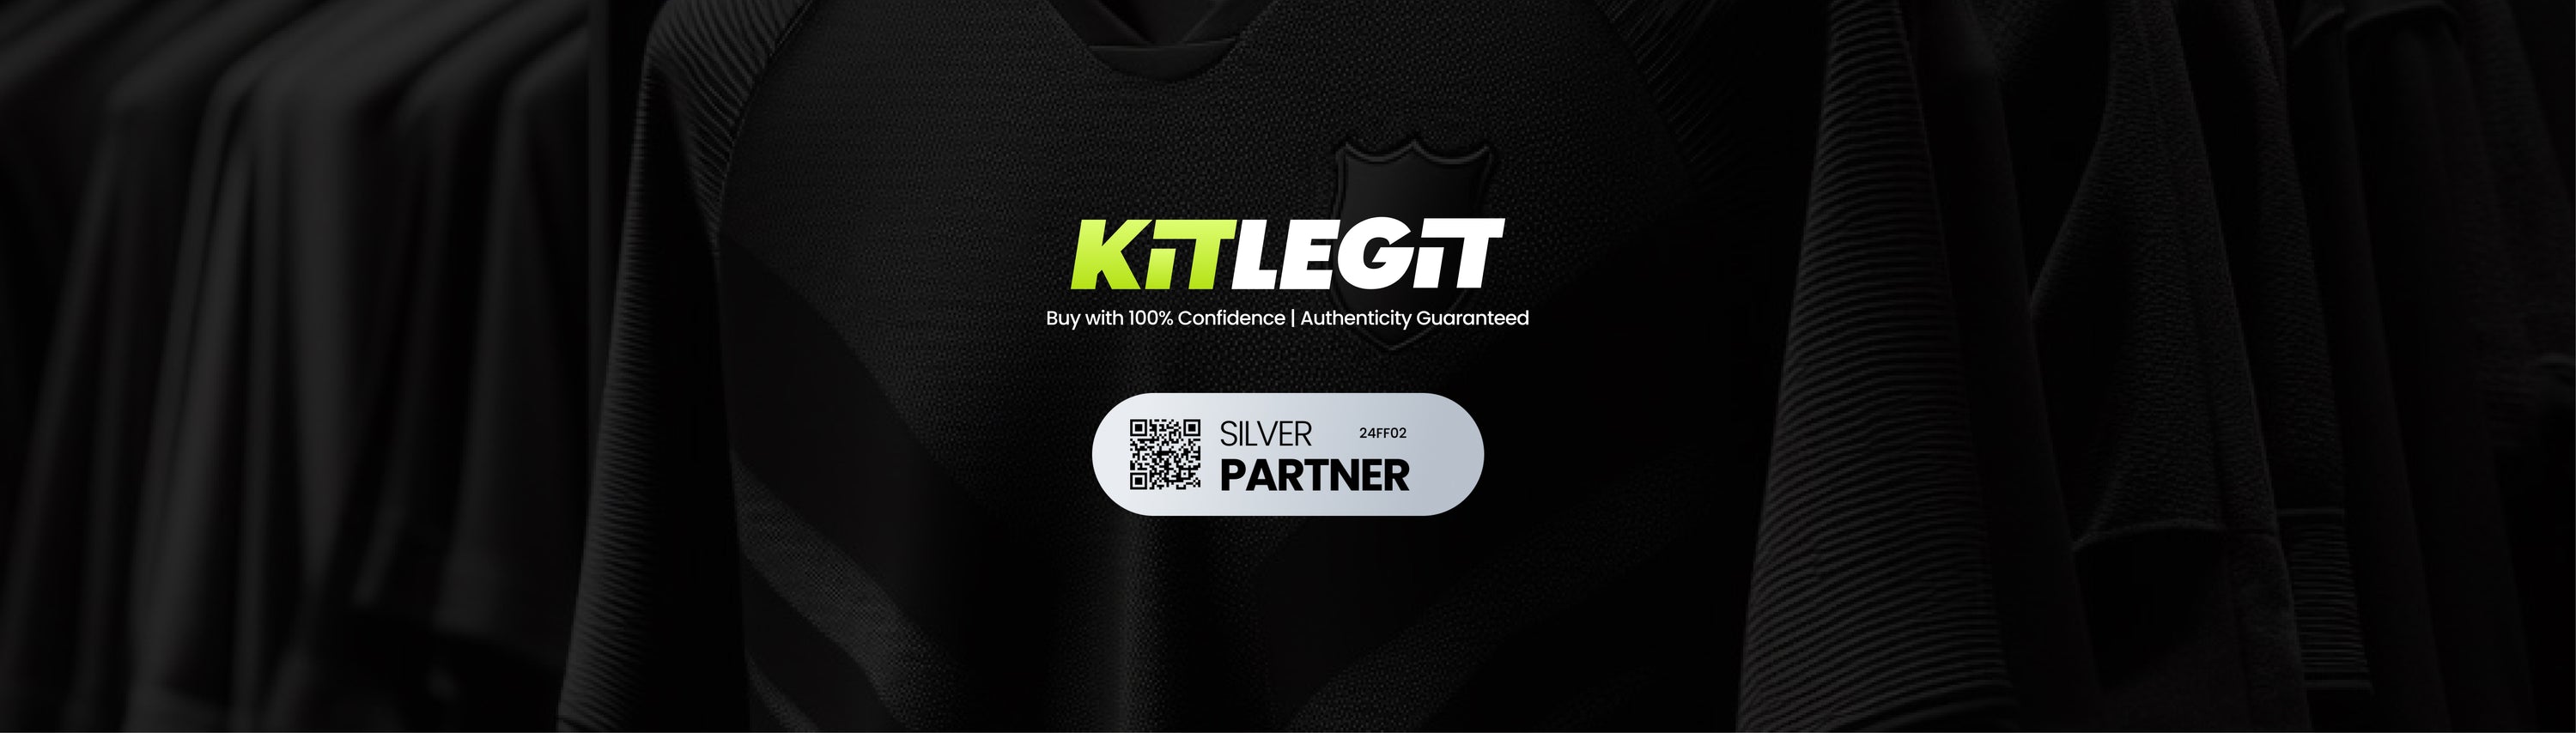 KITLEGIT BANNER WITH FOOTBALL FINERY PARTNERSHIP CERTIFICATE